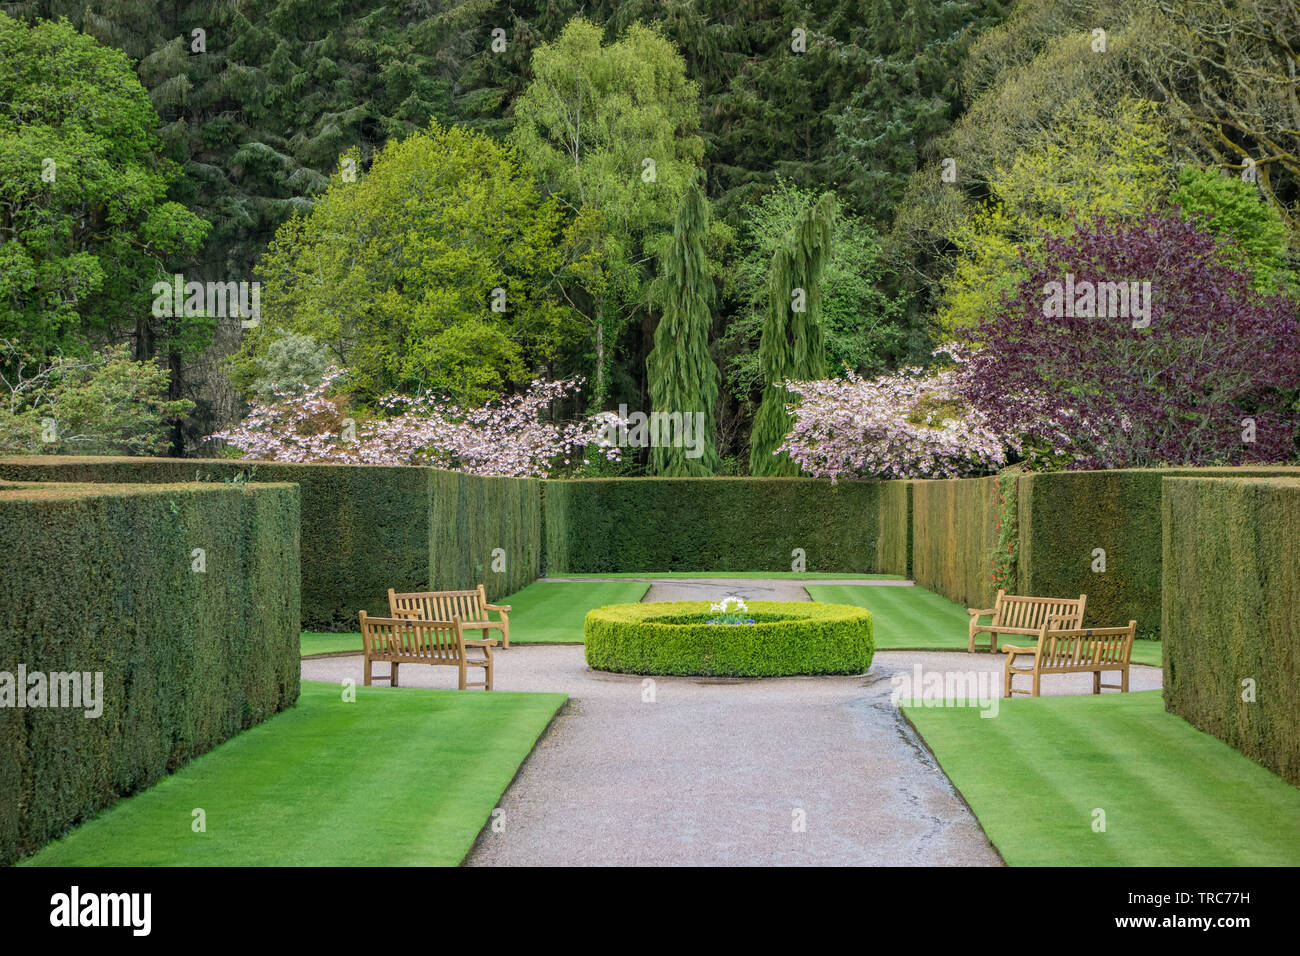 RHS Garden Rosemoor, a view from the entrance to formal lawns and hedges with a background of trees and shrubs, Stock Photo